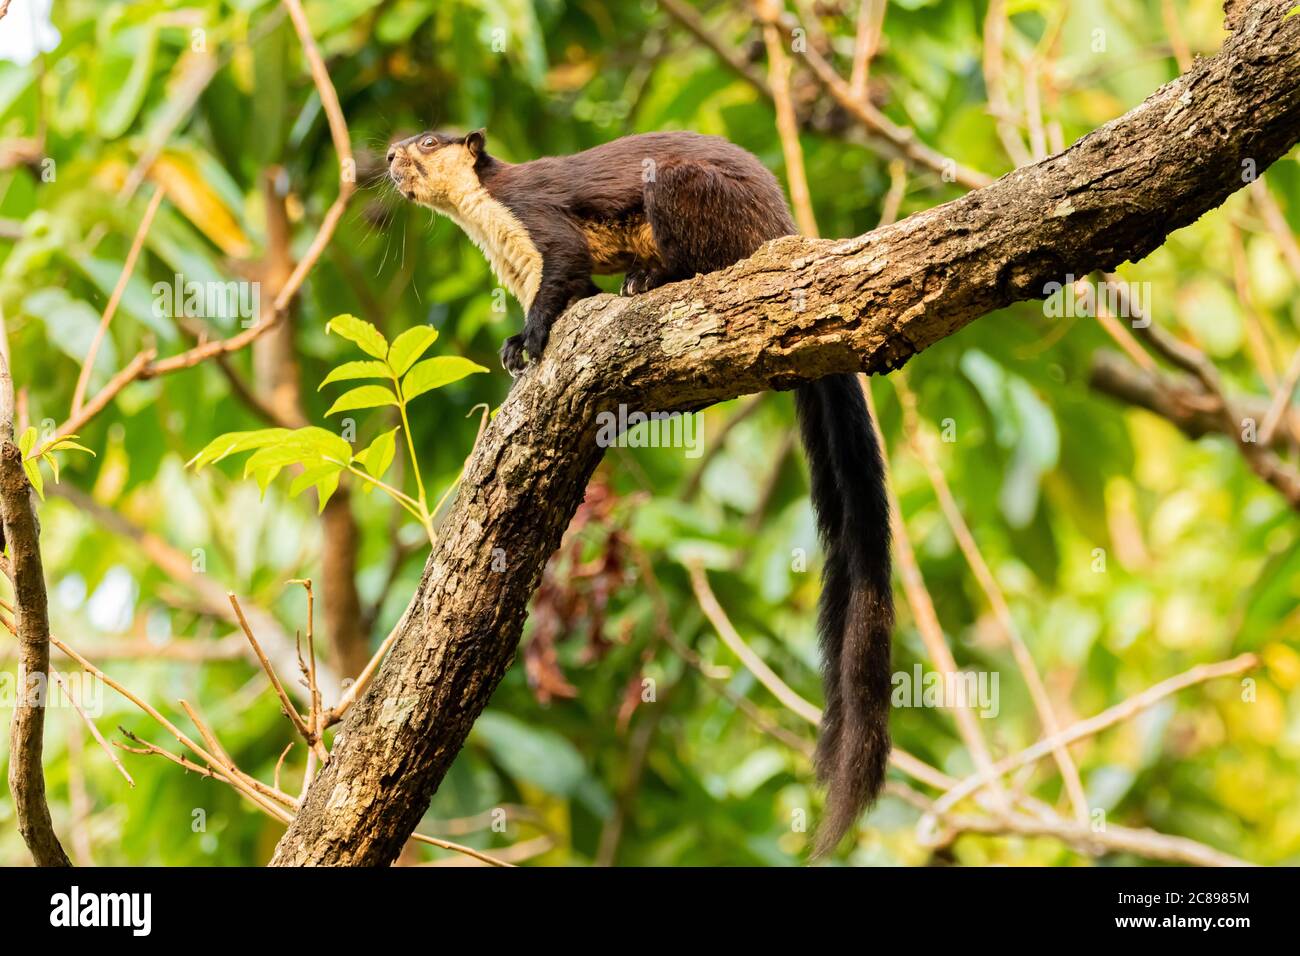 An Indian giant squirrel also known as Malabar squirrel or Giant squirrel siting on a tree branch with its tail hanging and eating nuts Stock Photo